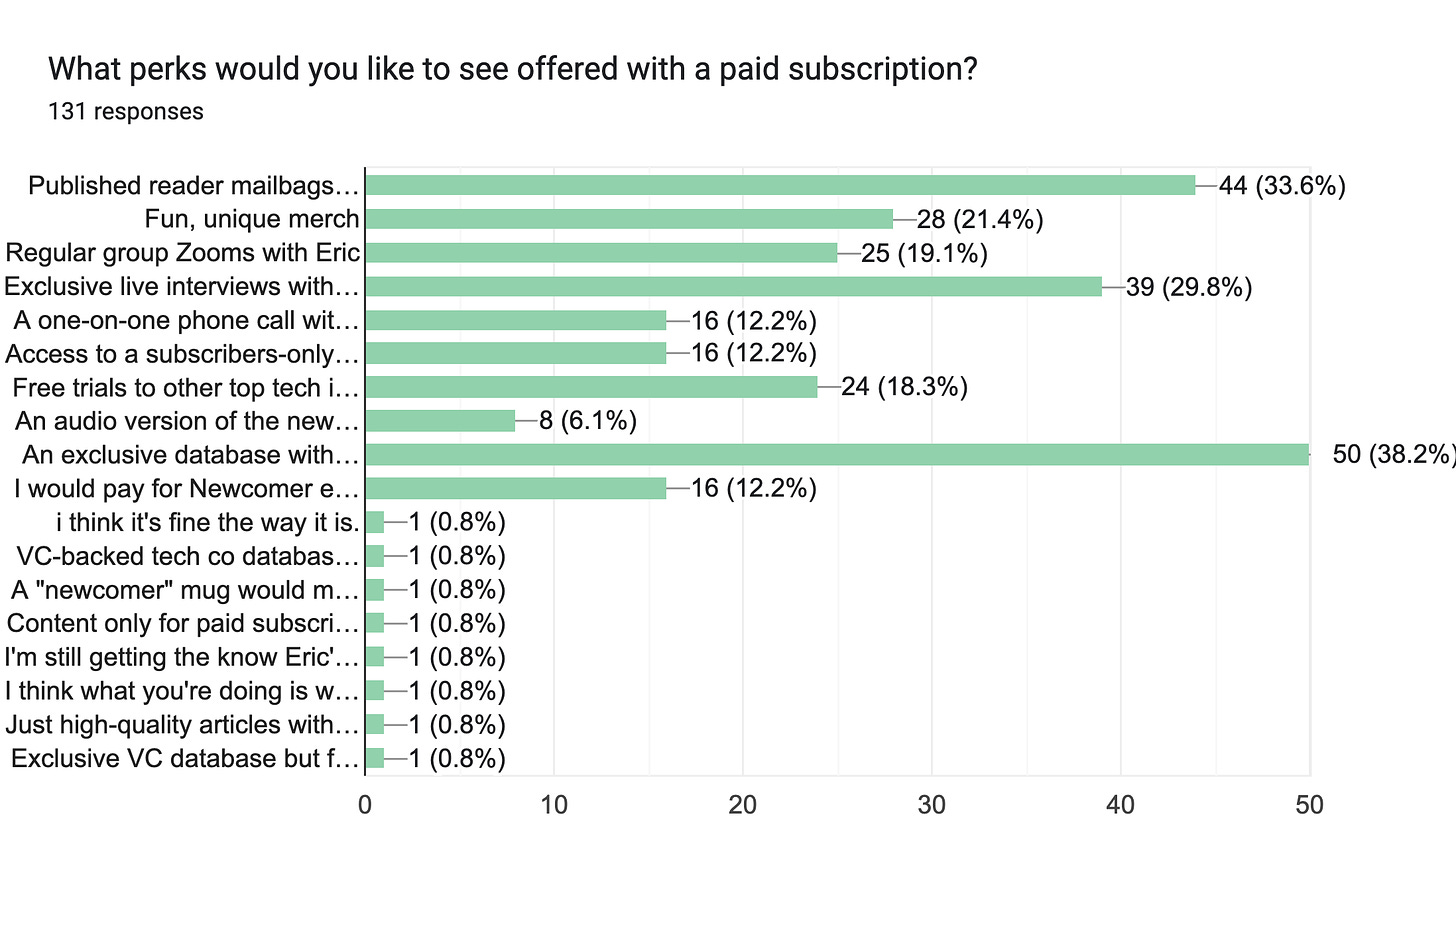 Forms response chart. Question title: What perks would you like to see offered with a paid subscription?. Number of responses: 131 responses.